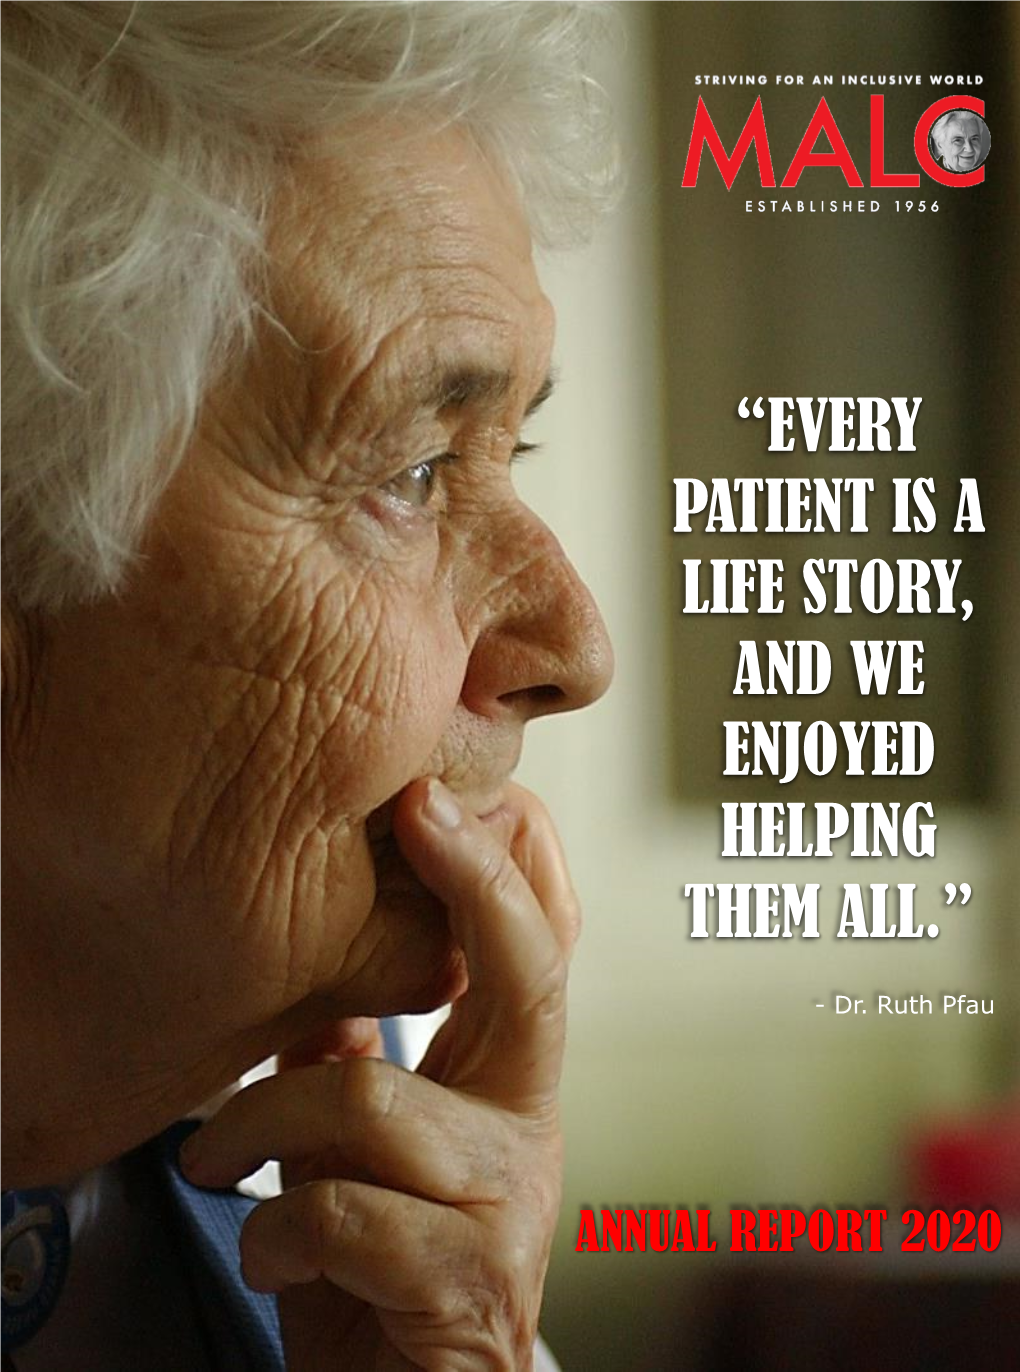 “Every Patient Is a Life Story, and We Enjoyed Helping Them All.”